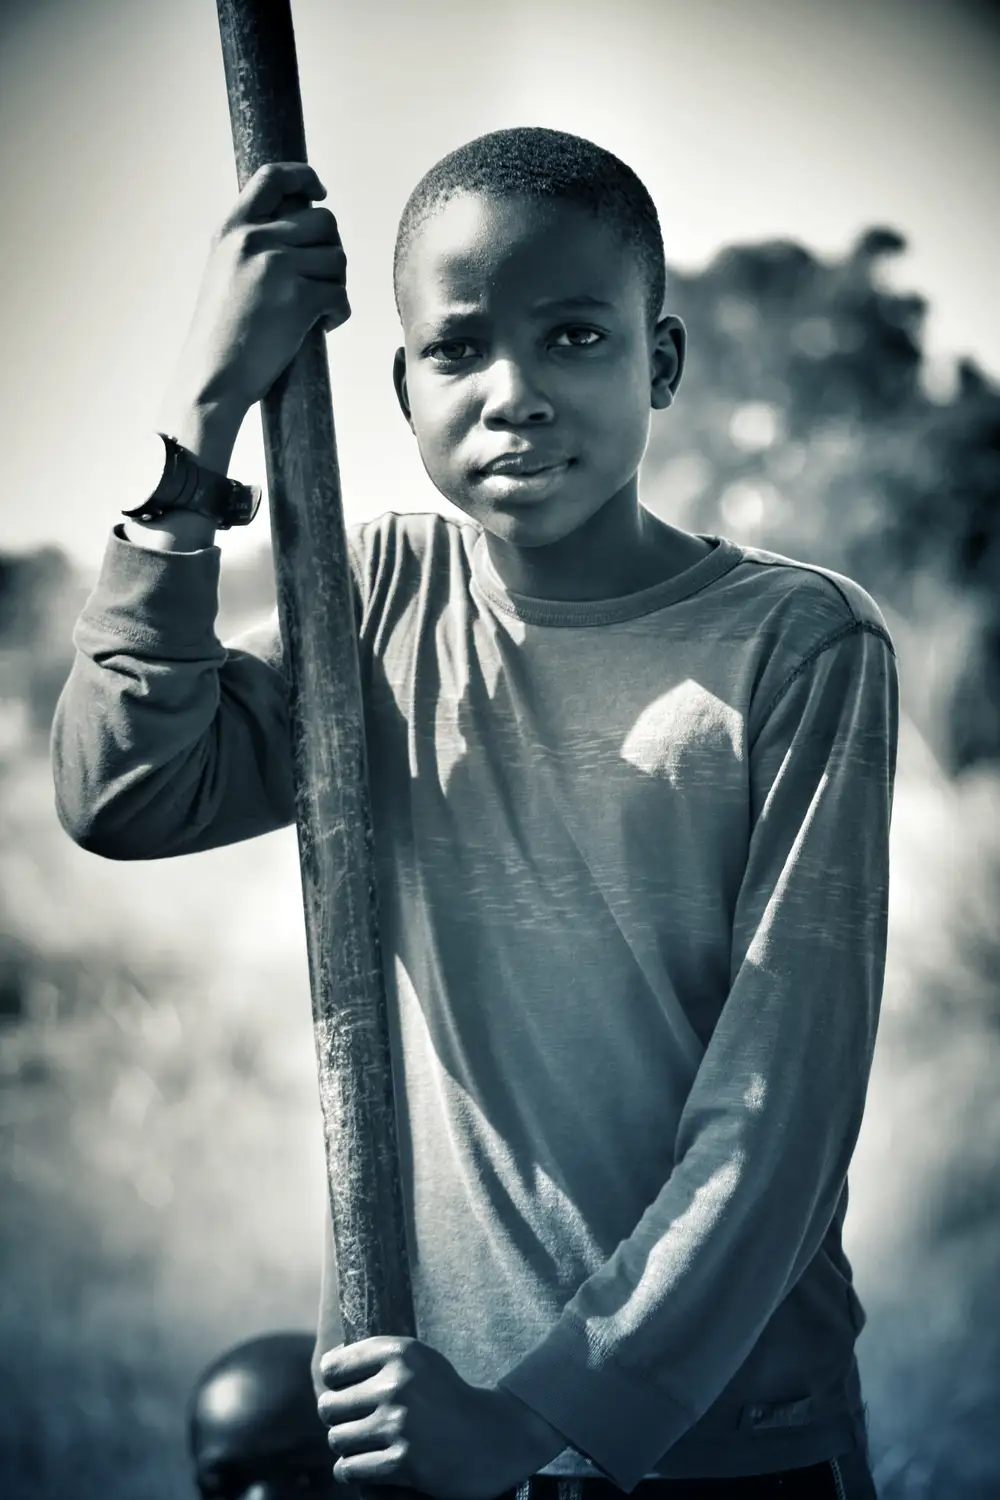 young boy holding a pole